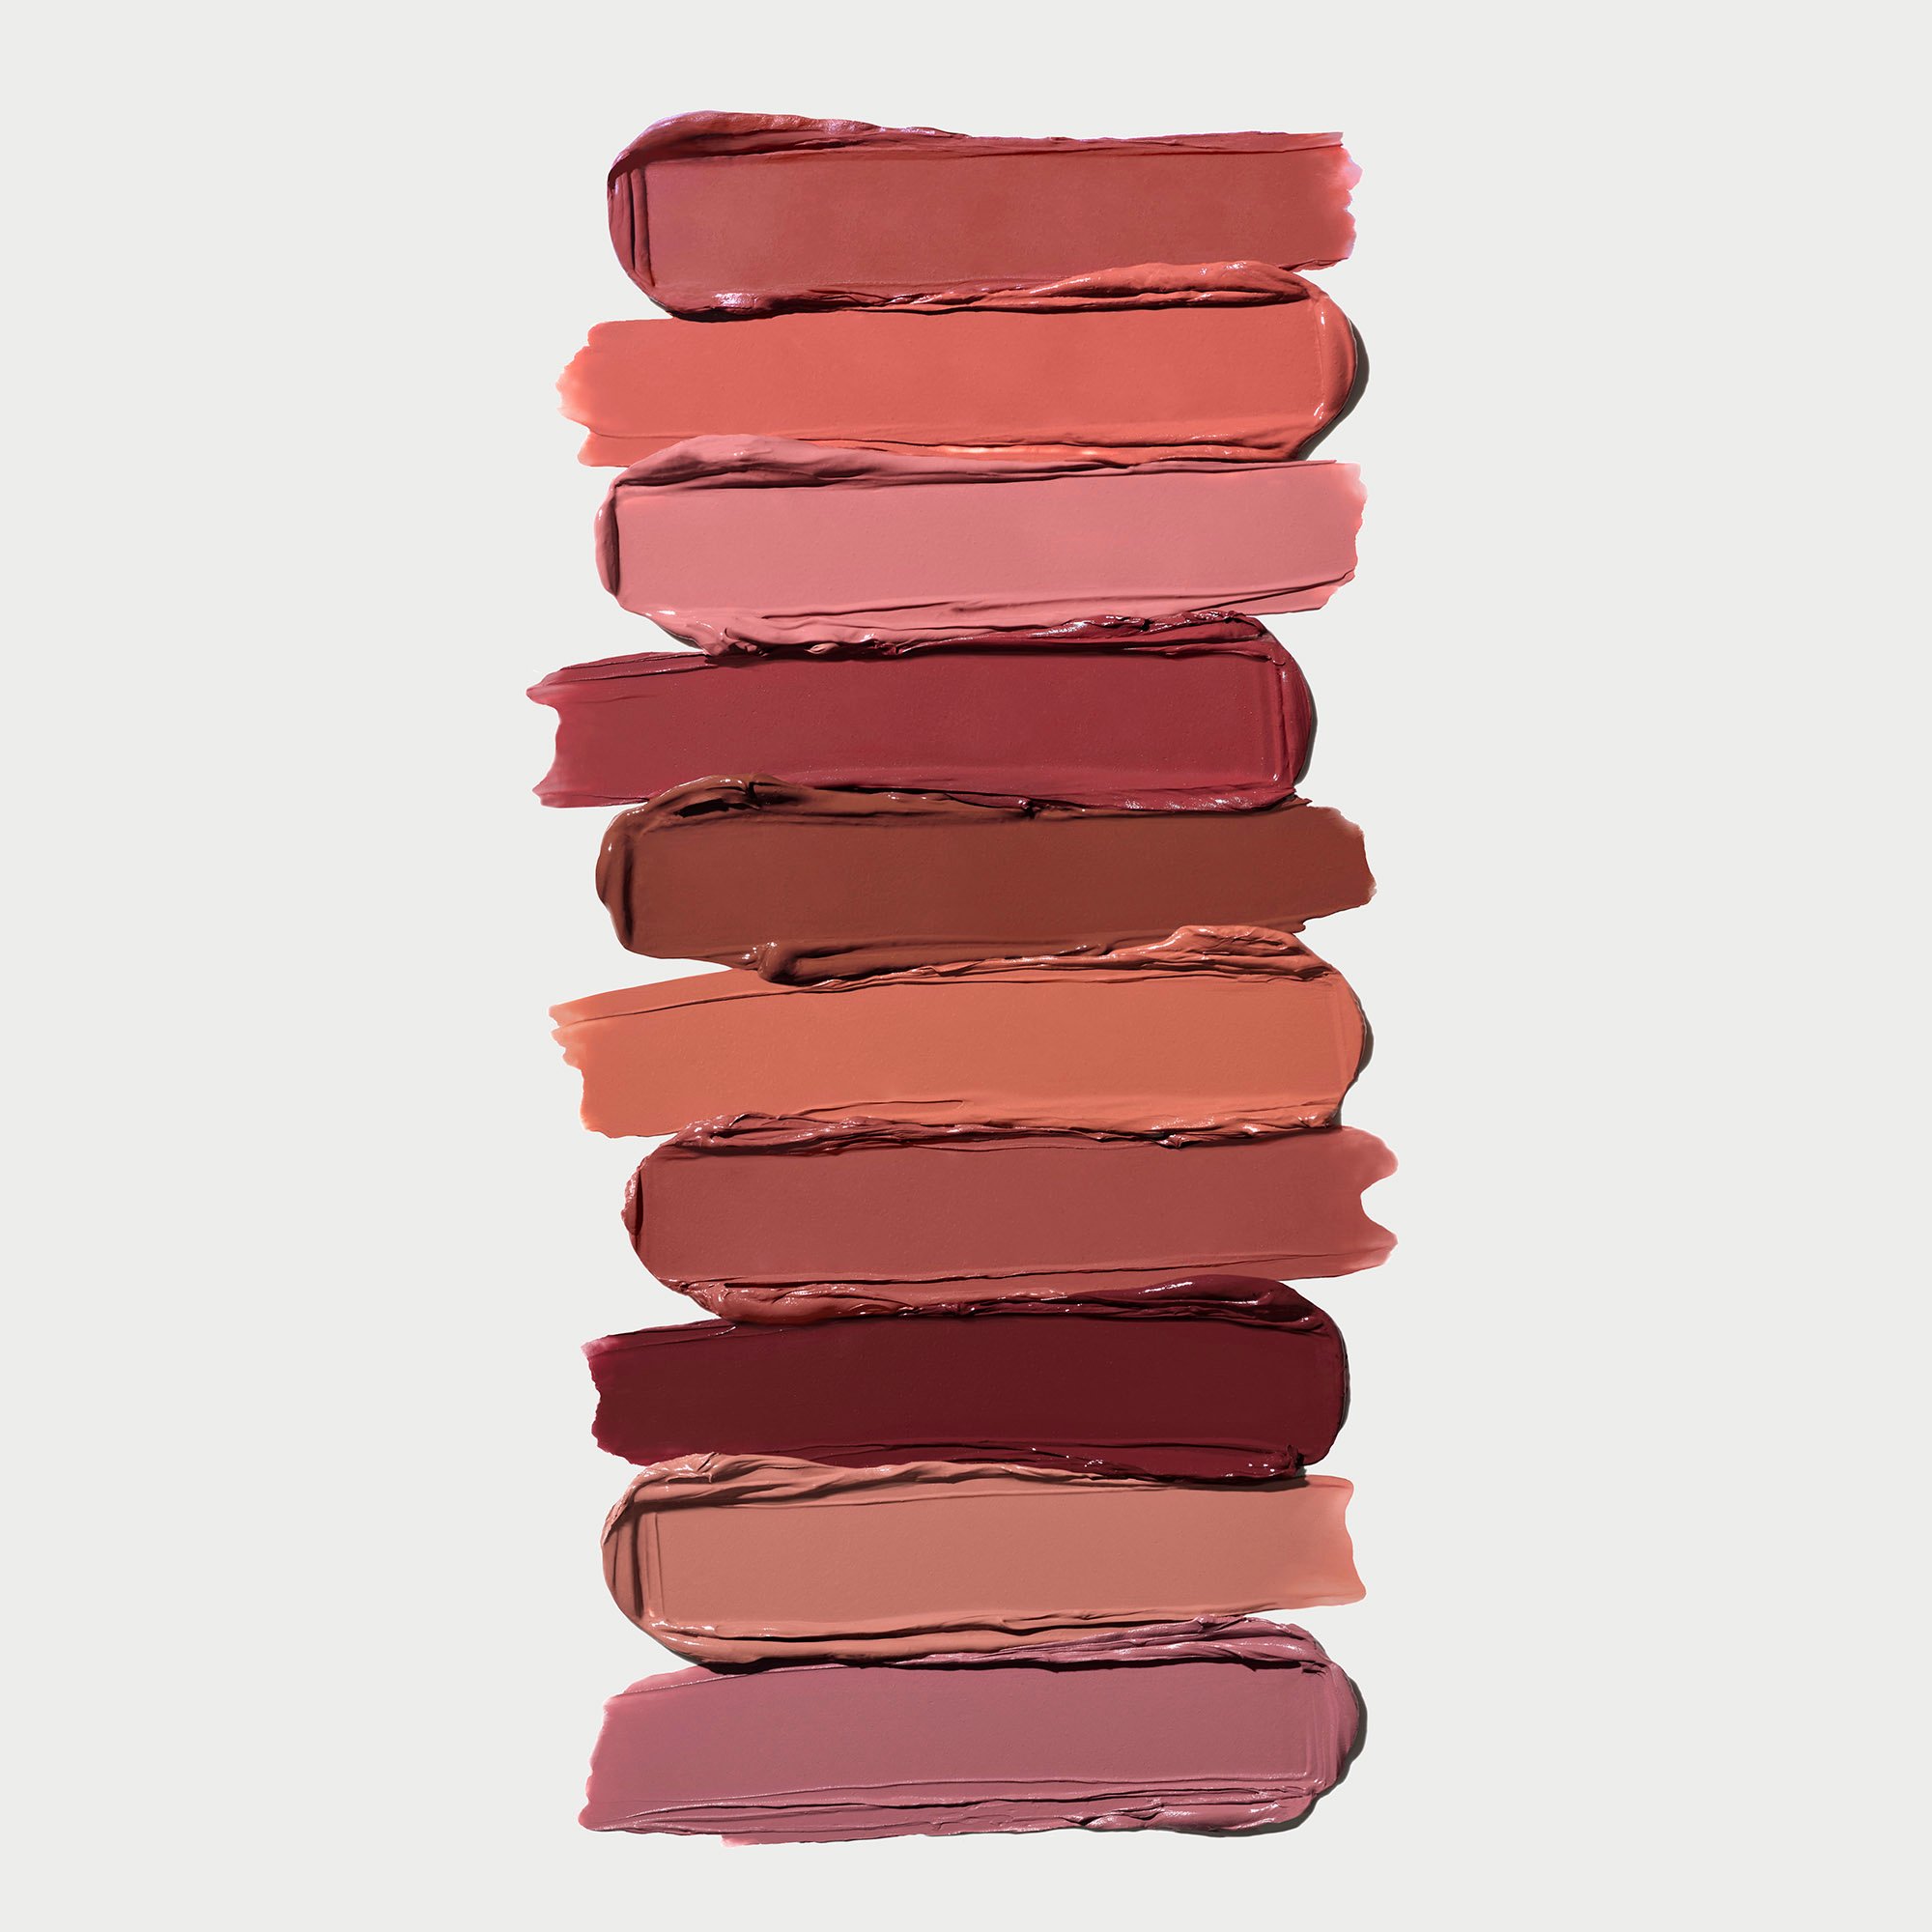 Full range of lipstick swatches stacked, including berry, mauve, and neutral nudes - desktop